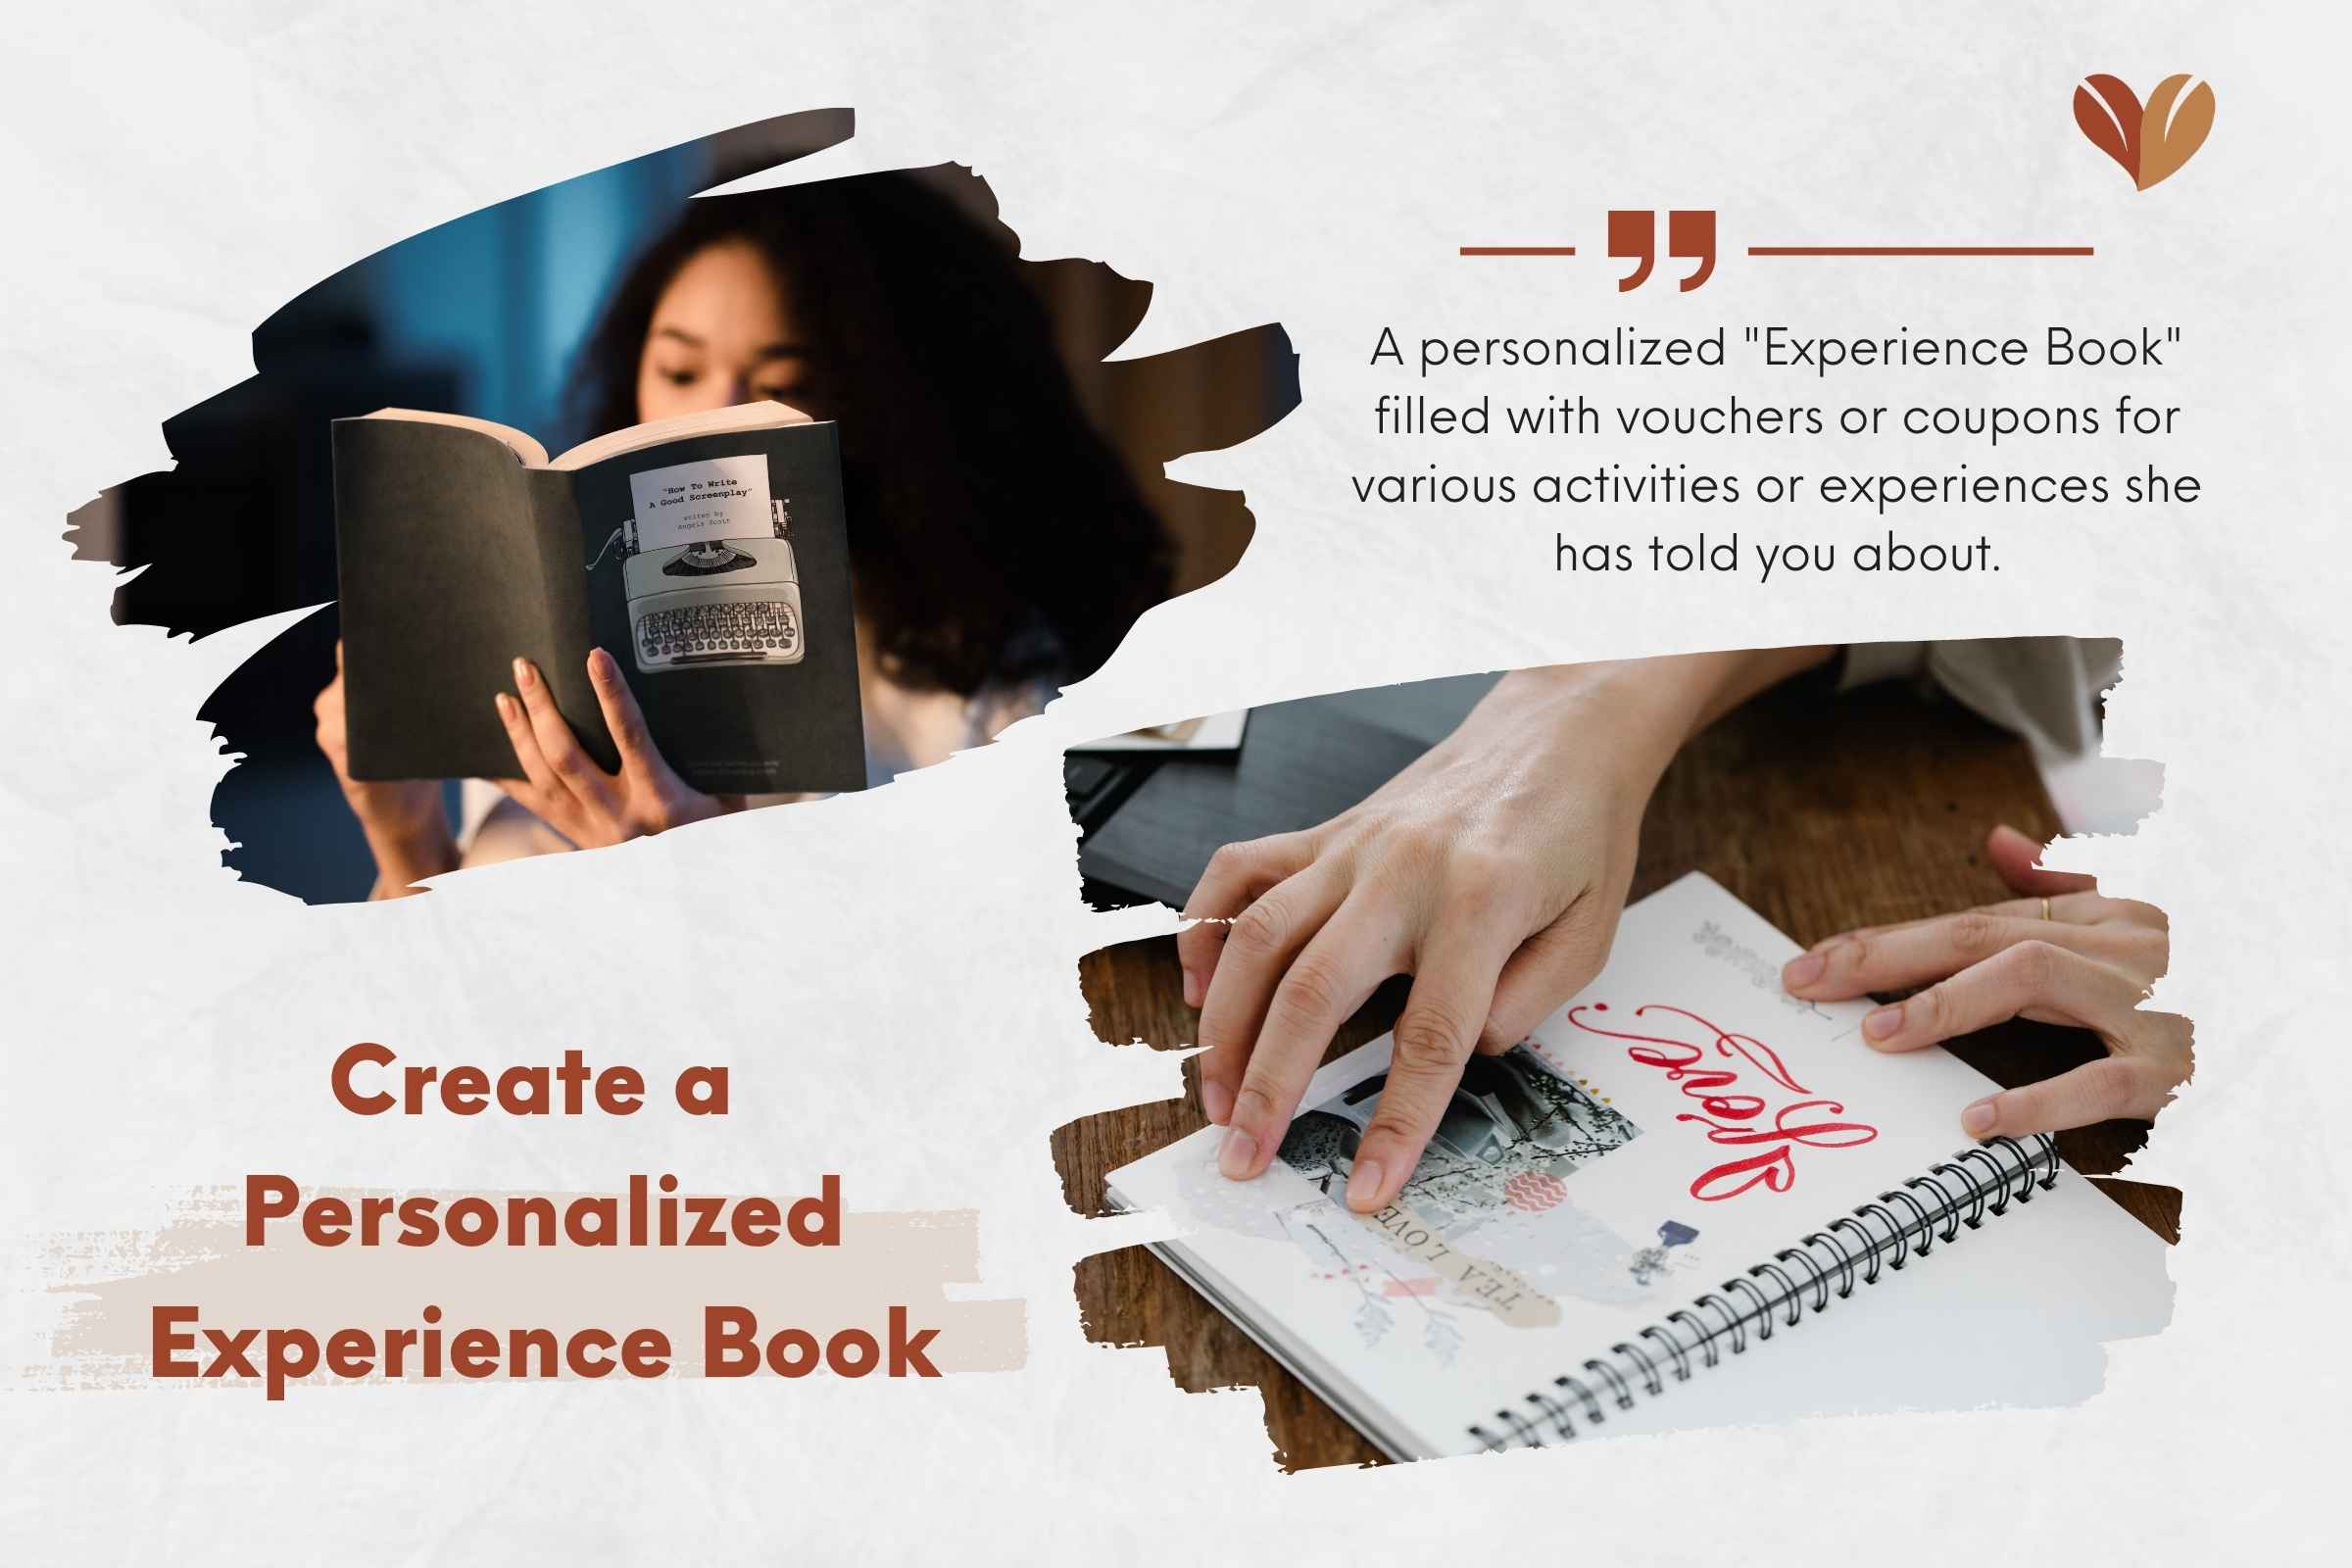 Create a personalized "Experience Book" for your wife